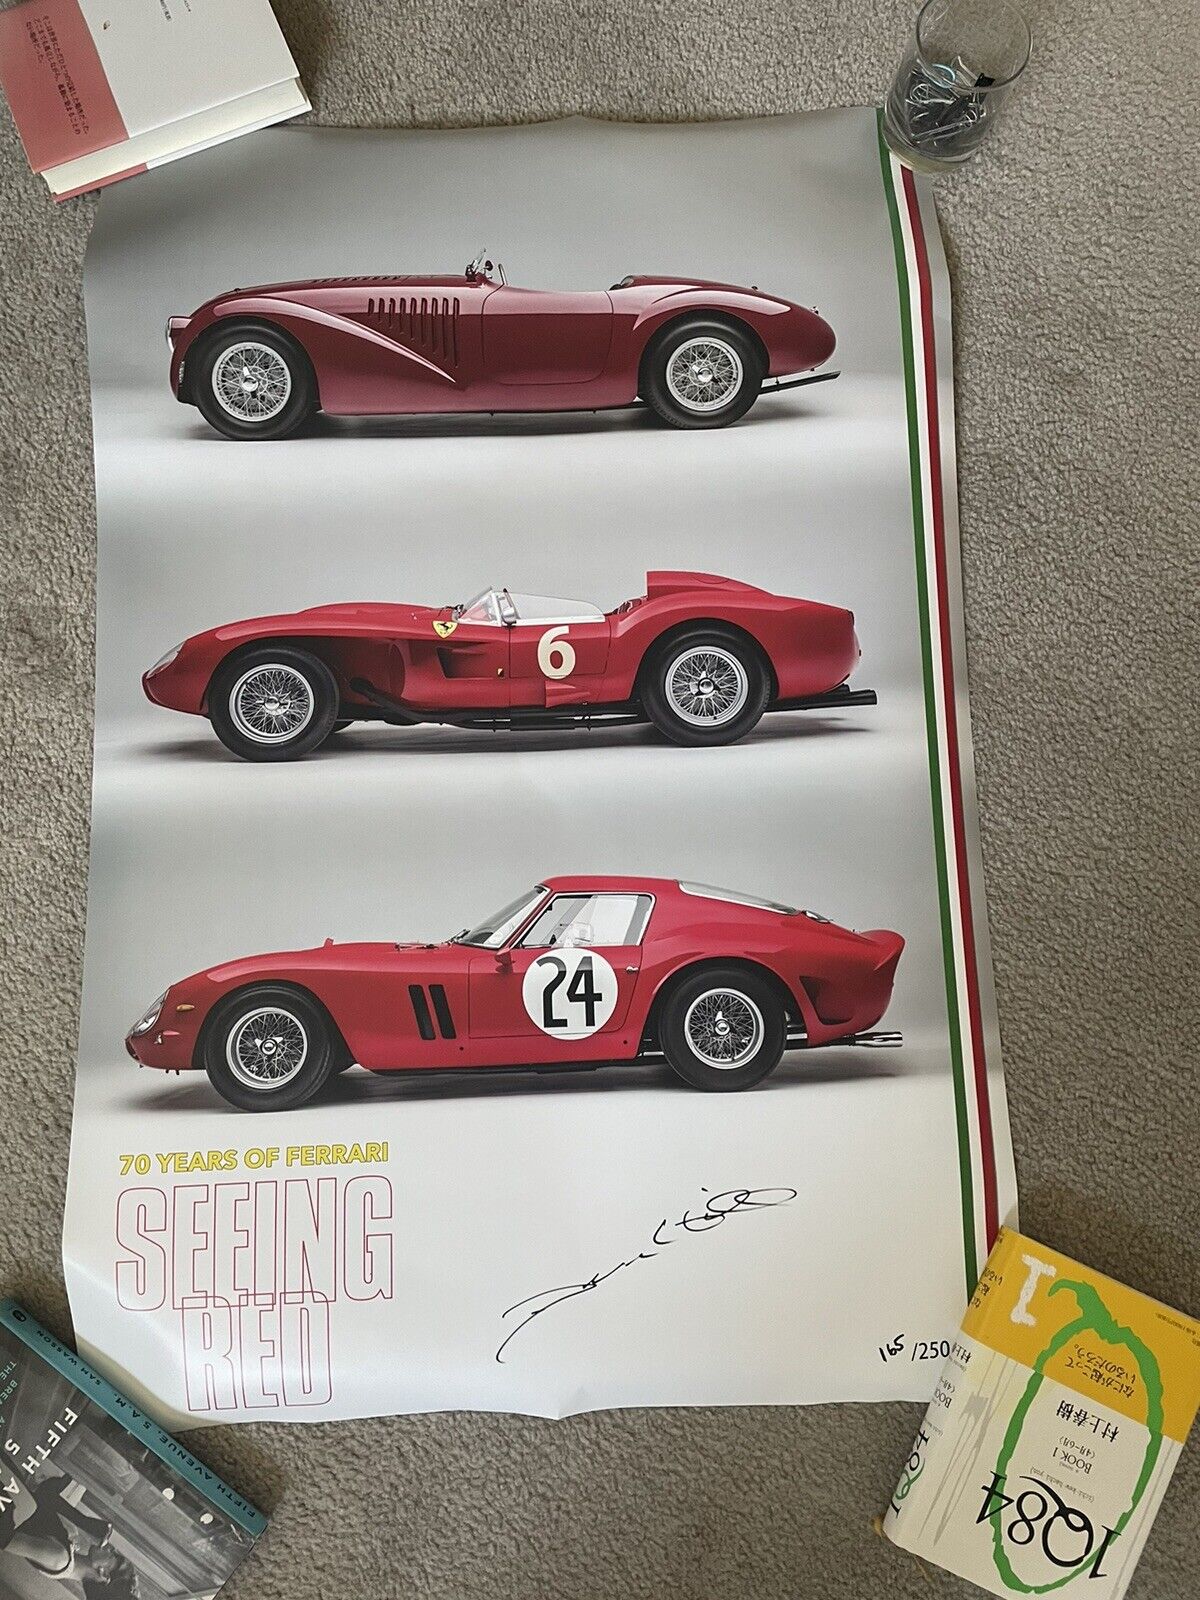 70 Years Of Ferrari Sebring Red Petersen Automotive Museum Poster - LIMITED /250